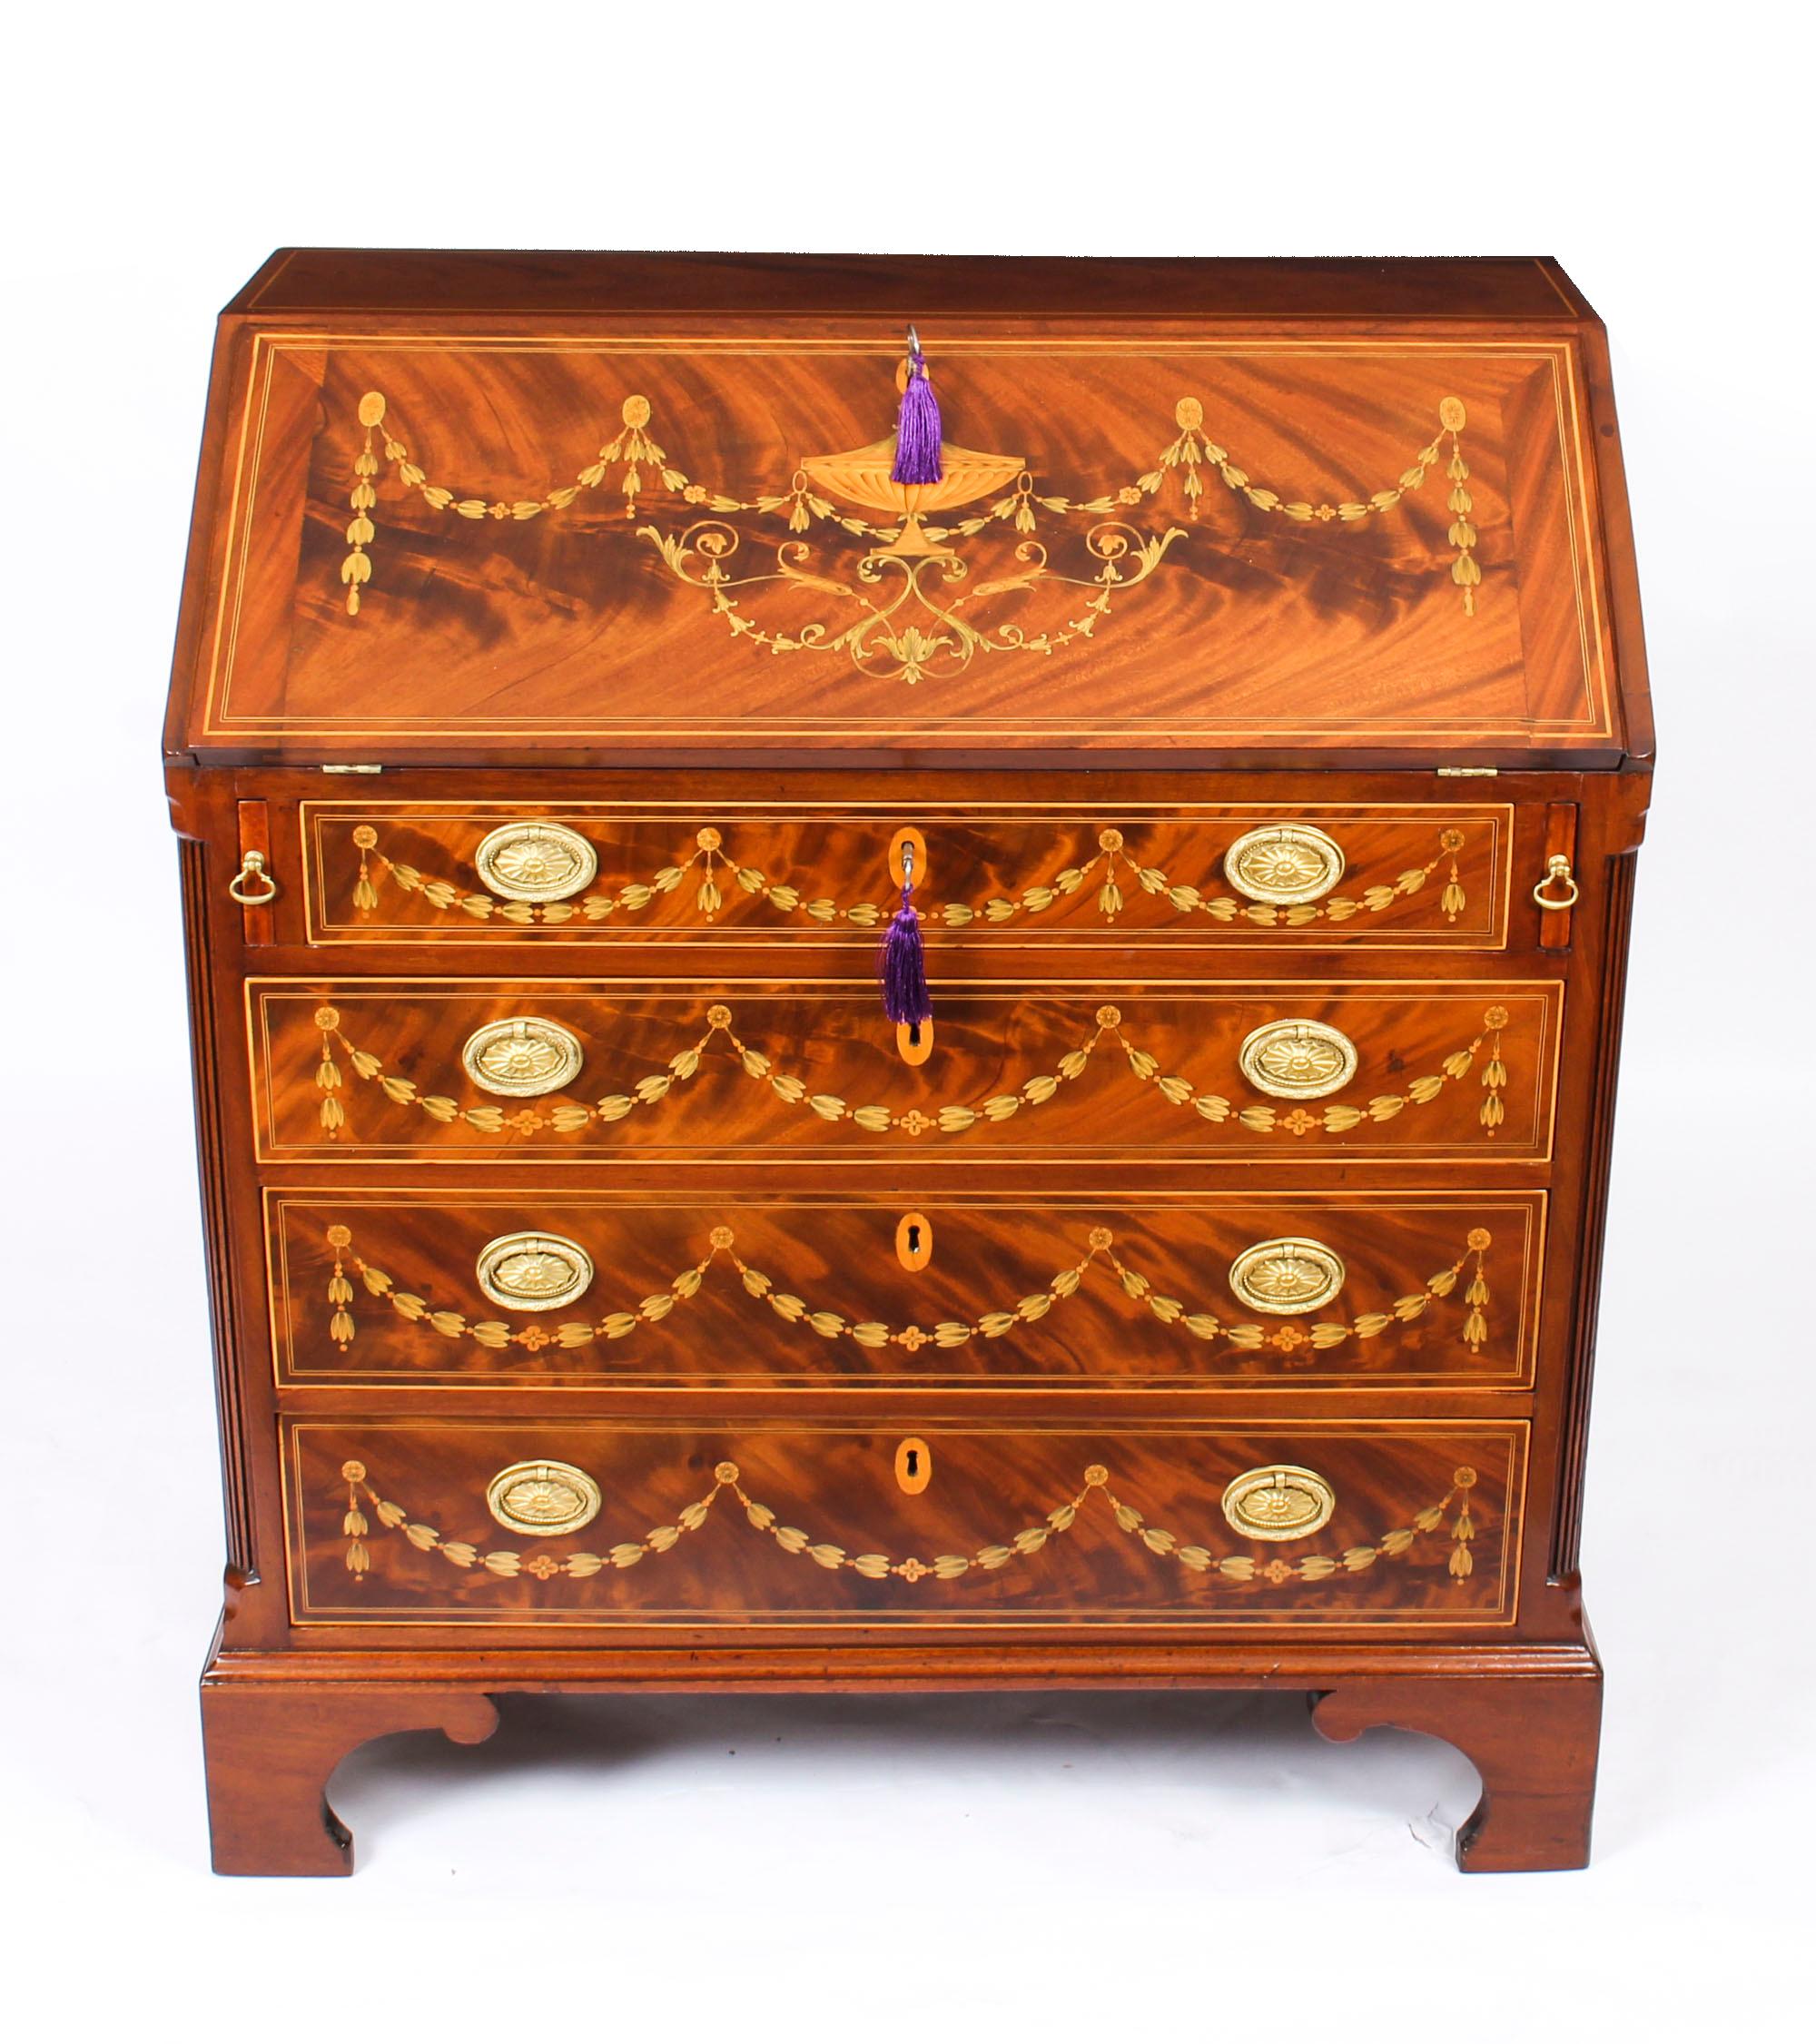 This antique bureau is late 18th century in date and has been beautifully crafted from top quality well figured flame mahogany which has been richly later inlaid with superb marquetry decoration comprising a large decorative urn and several garlands